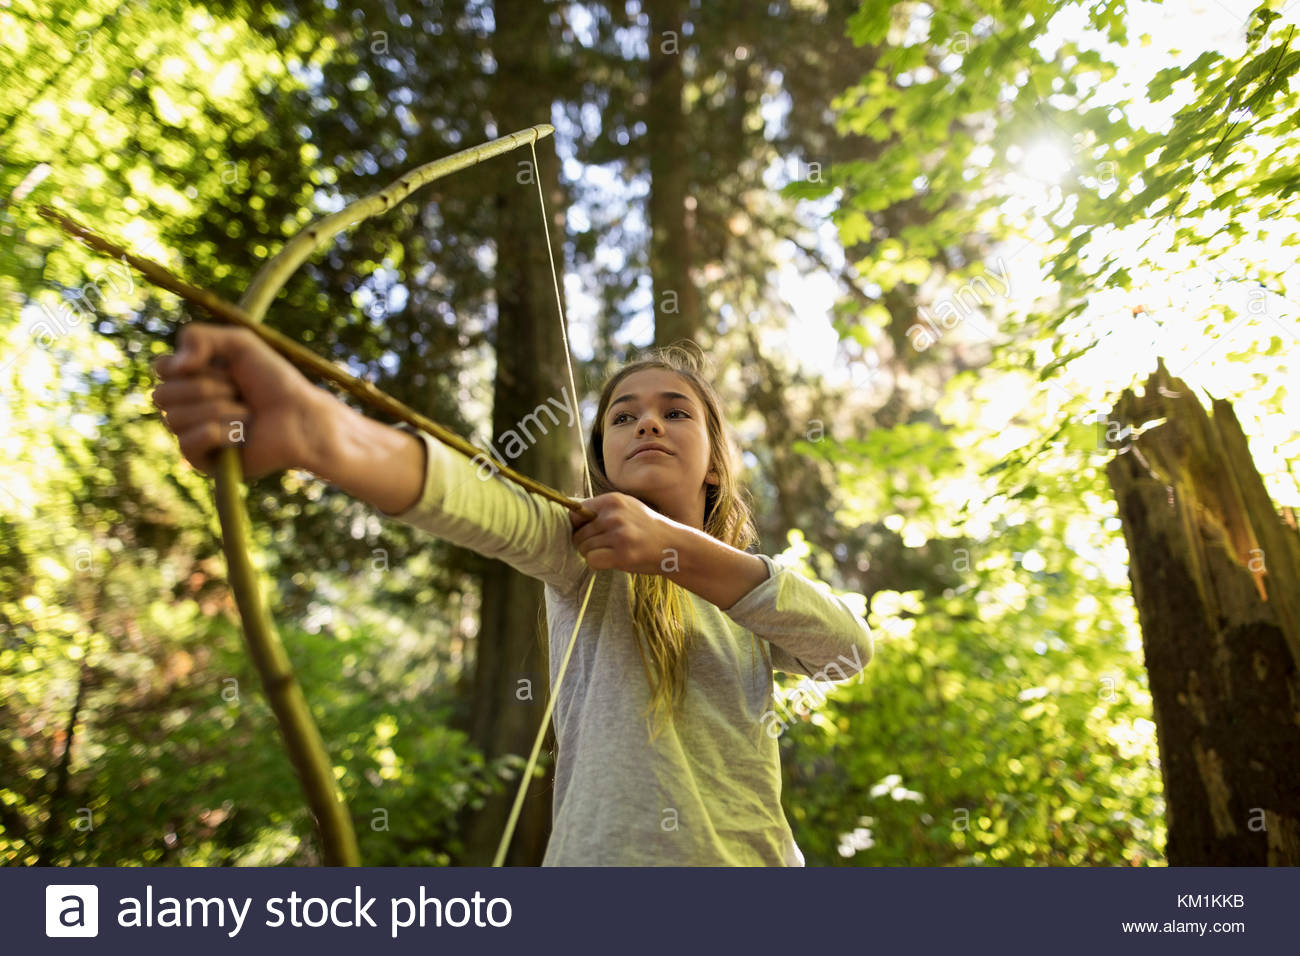 Confident girl aiming bow and arrow in woods Stock Photo